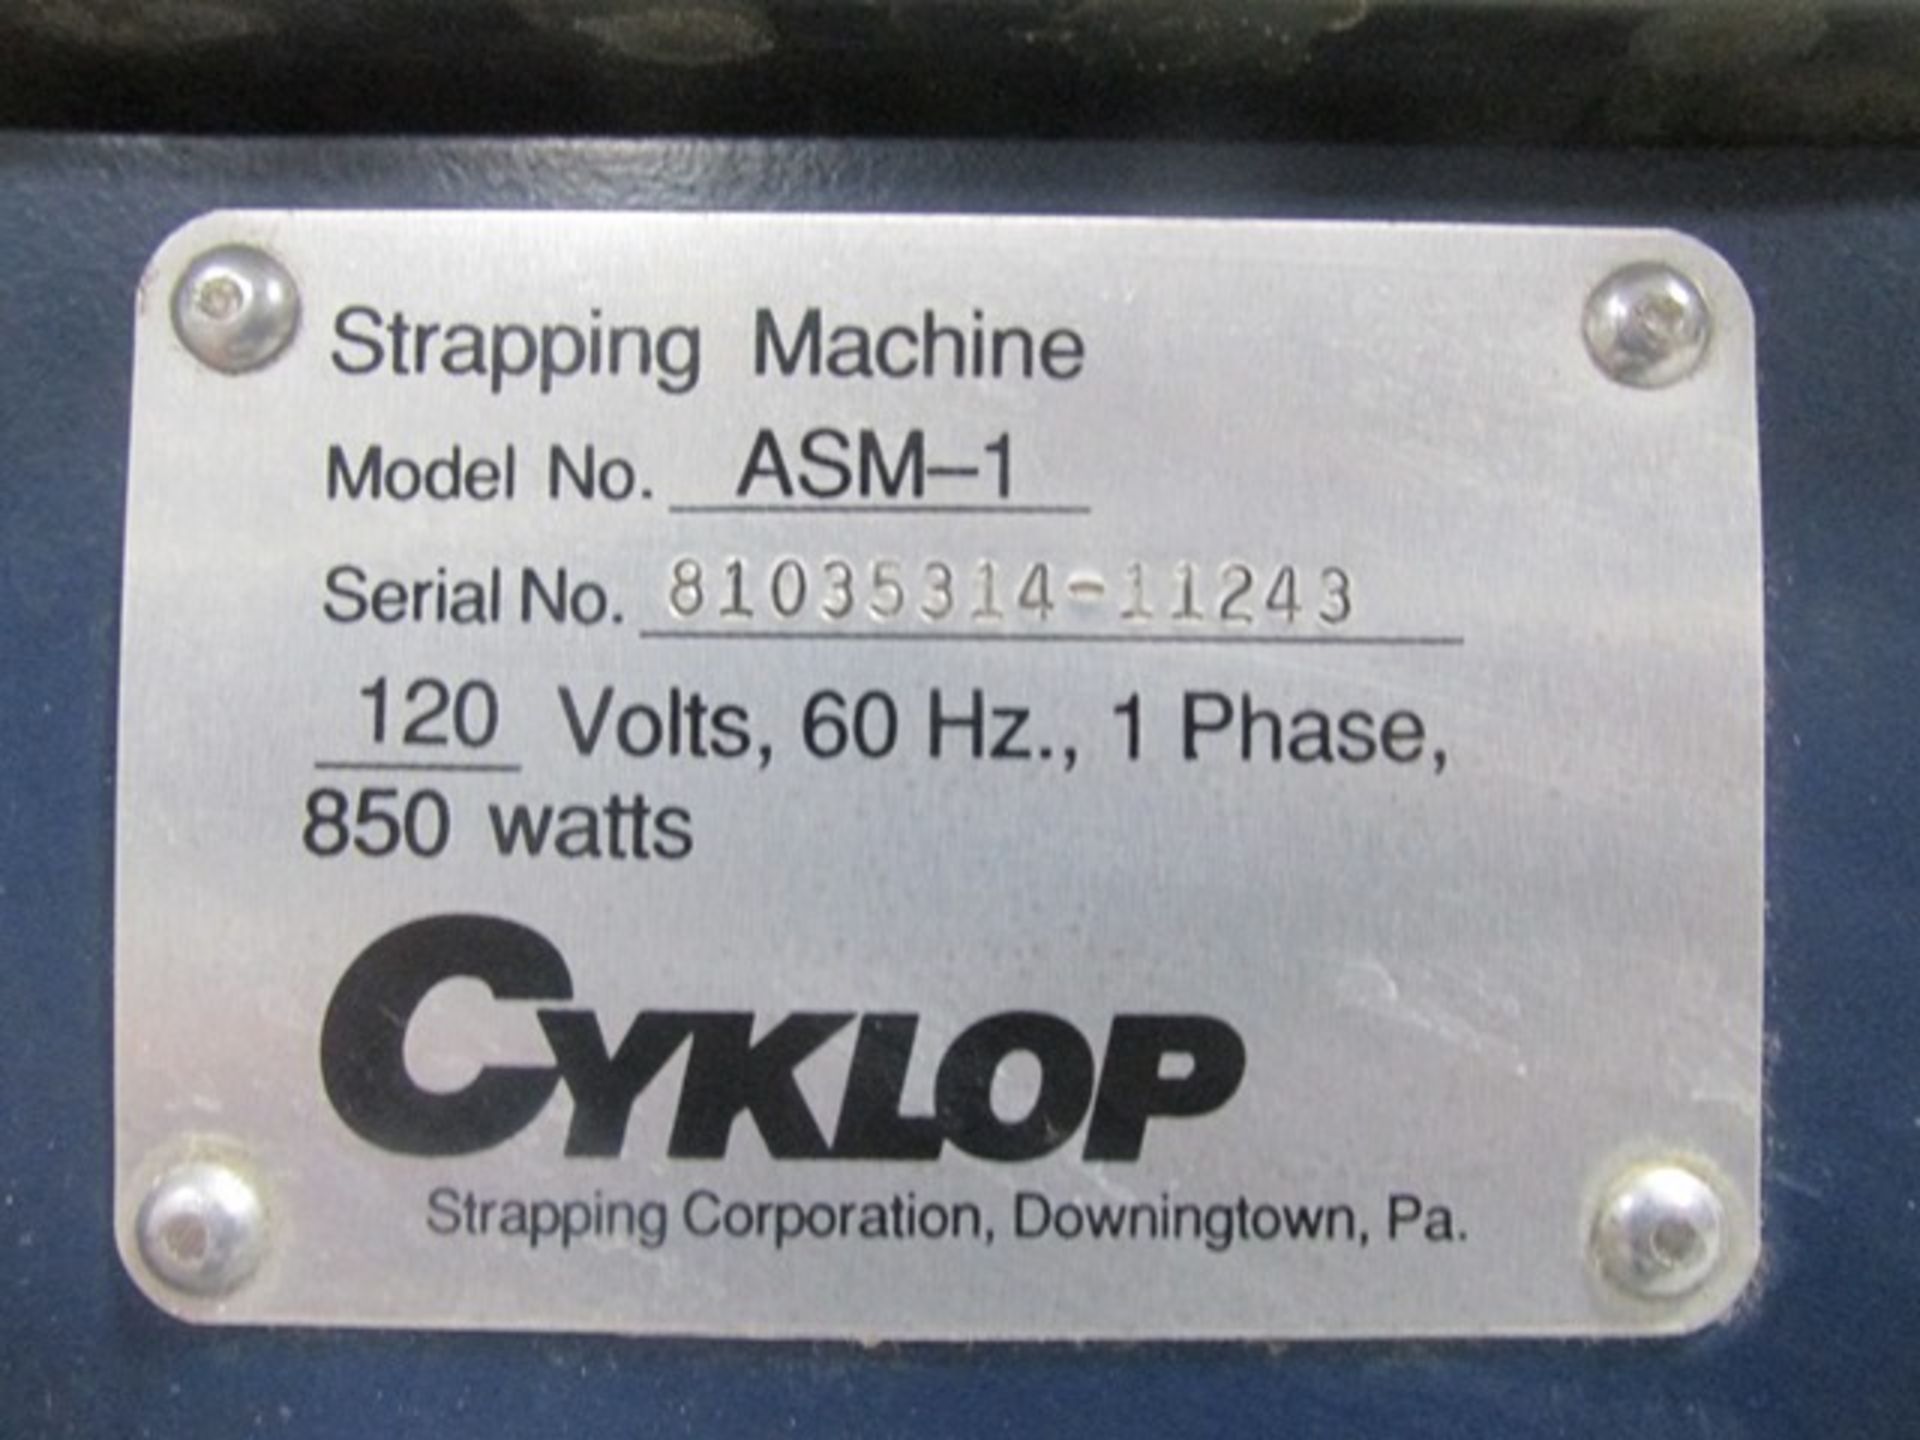 Cyklop Automatic Strapping Machine, Model ASM-1 - Image 6 of 6